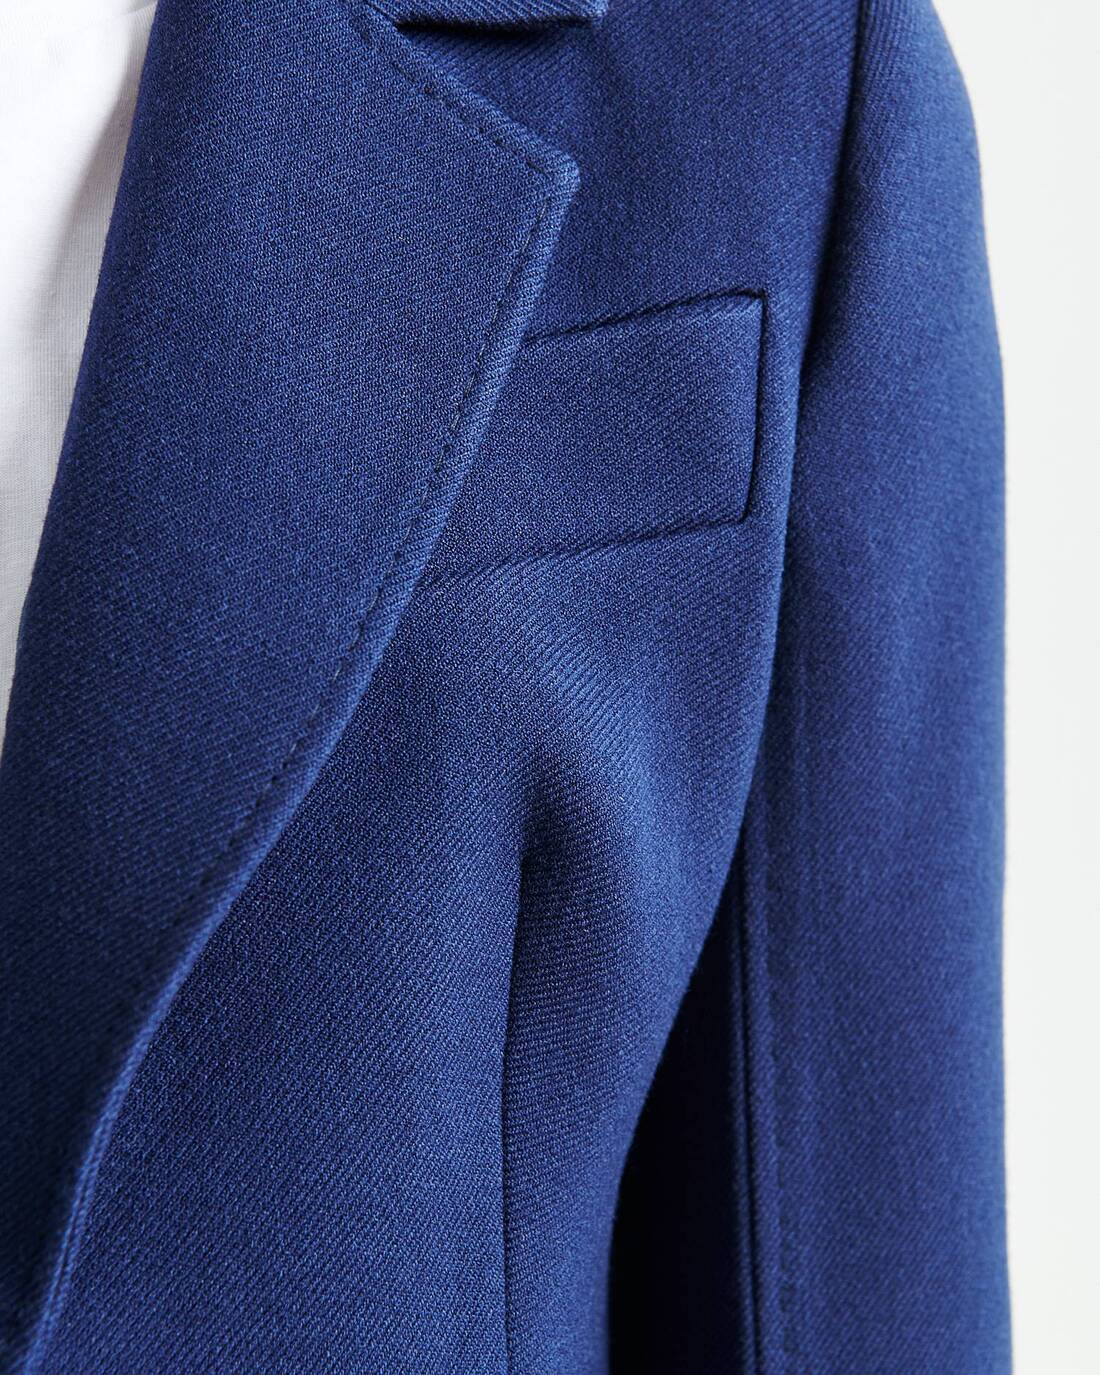 Fitted wool blazer with decorative stitching